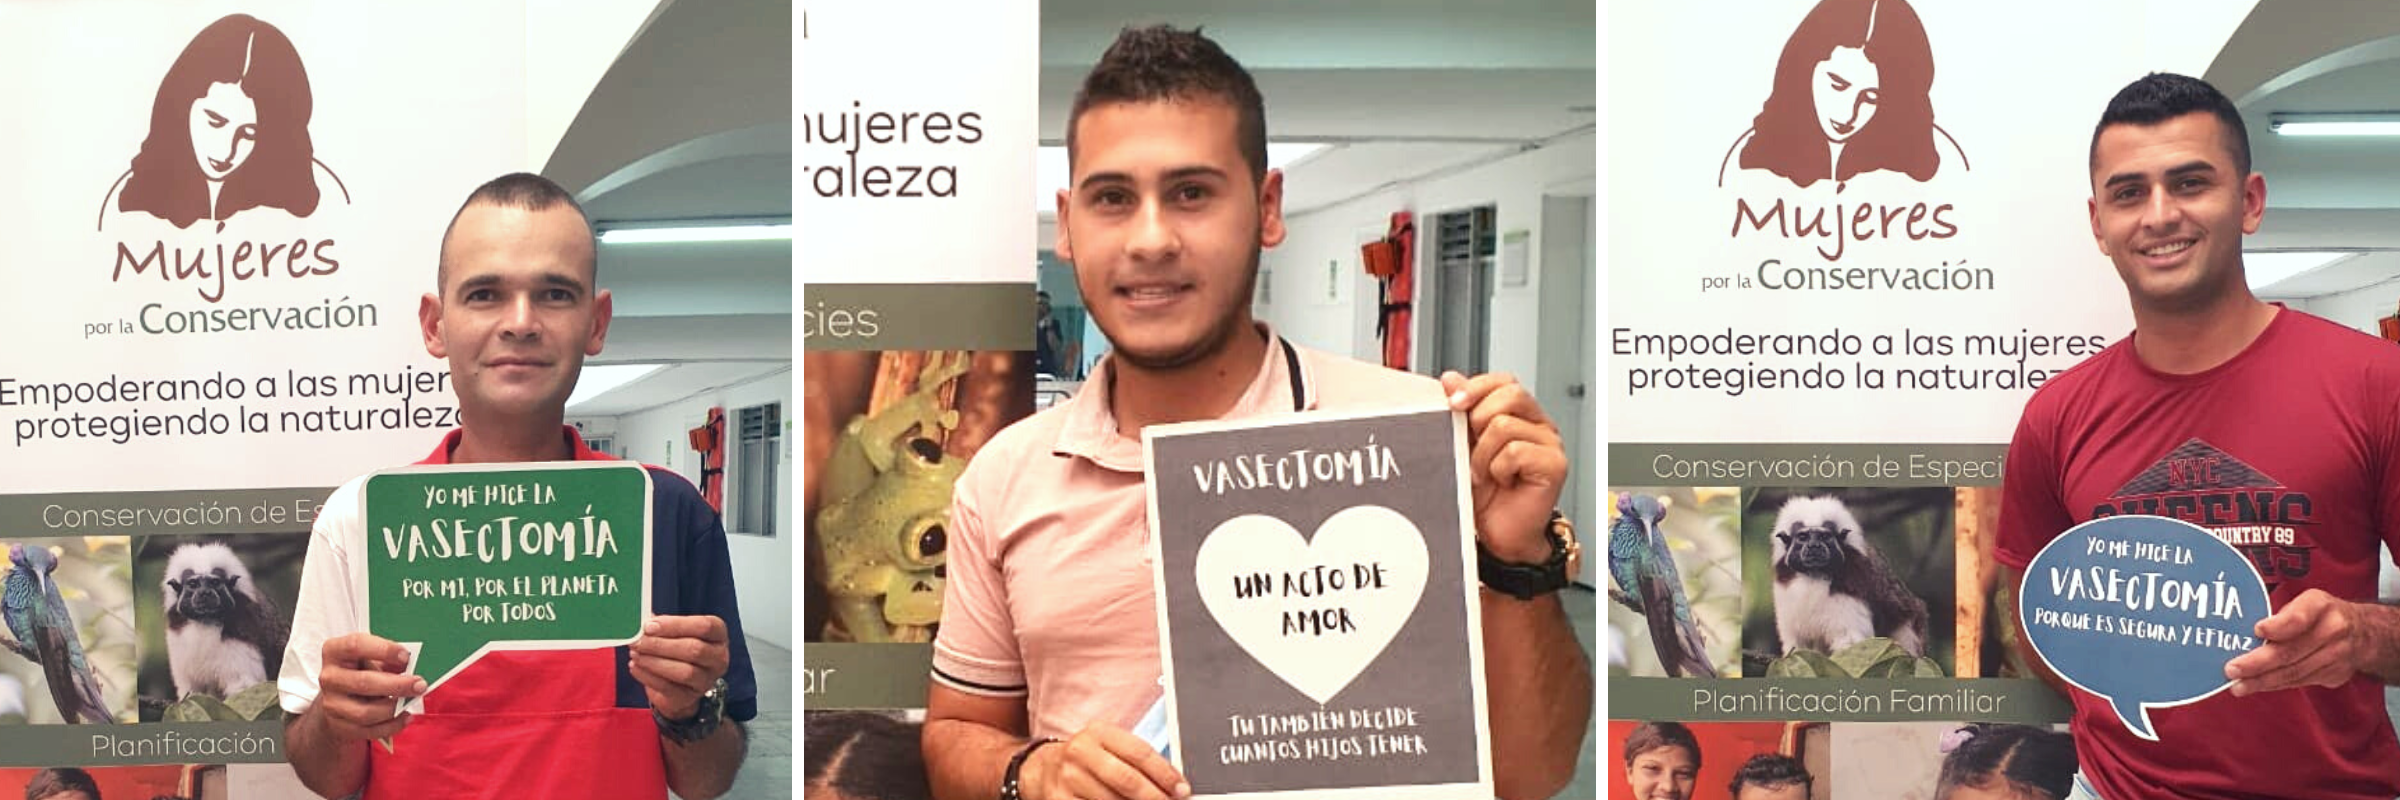 Vasectomy Campaign, Colombia men's Family Planning, reproductive healthcare